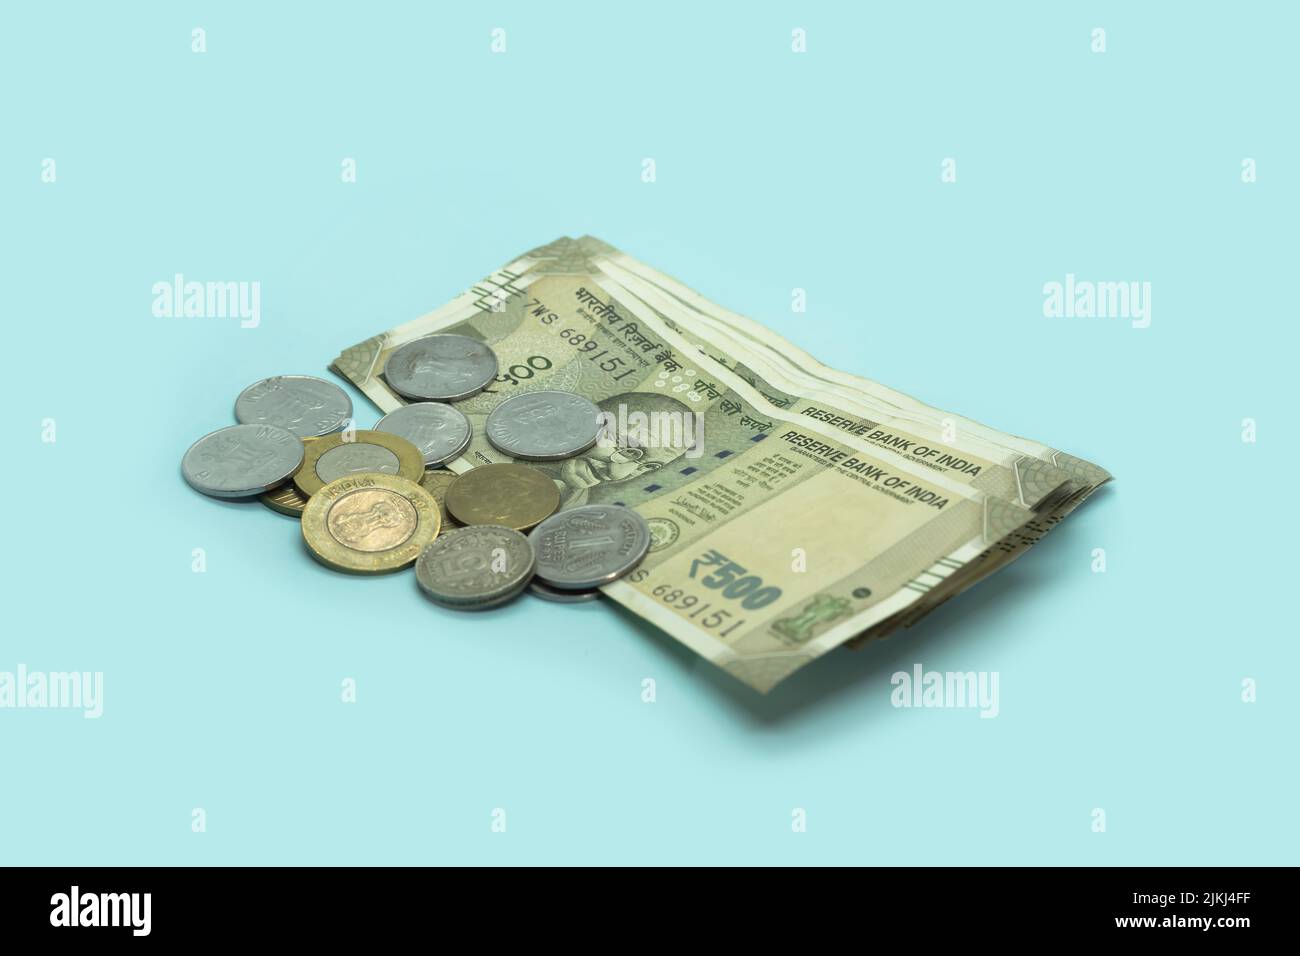 The Indian currency - 500 rupee note with Indian coins. Stock Photo